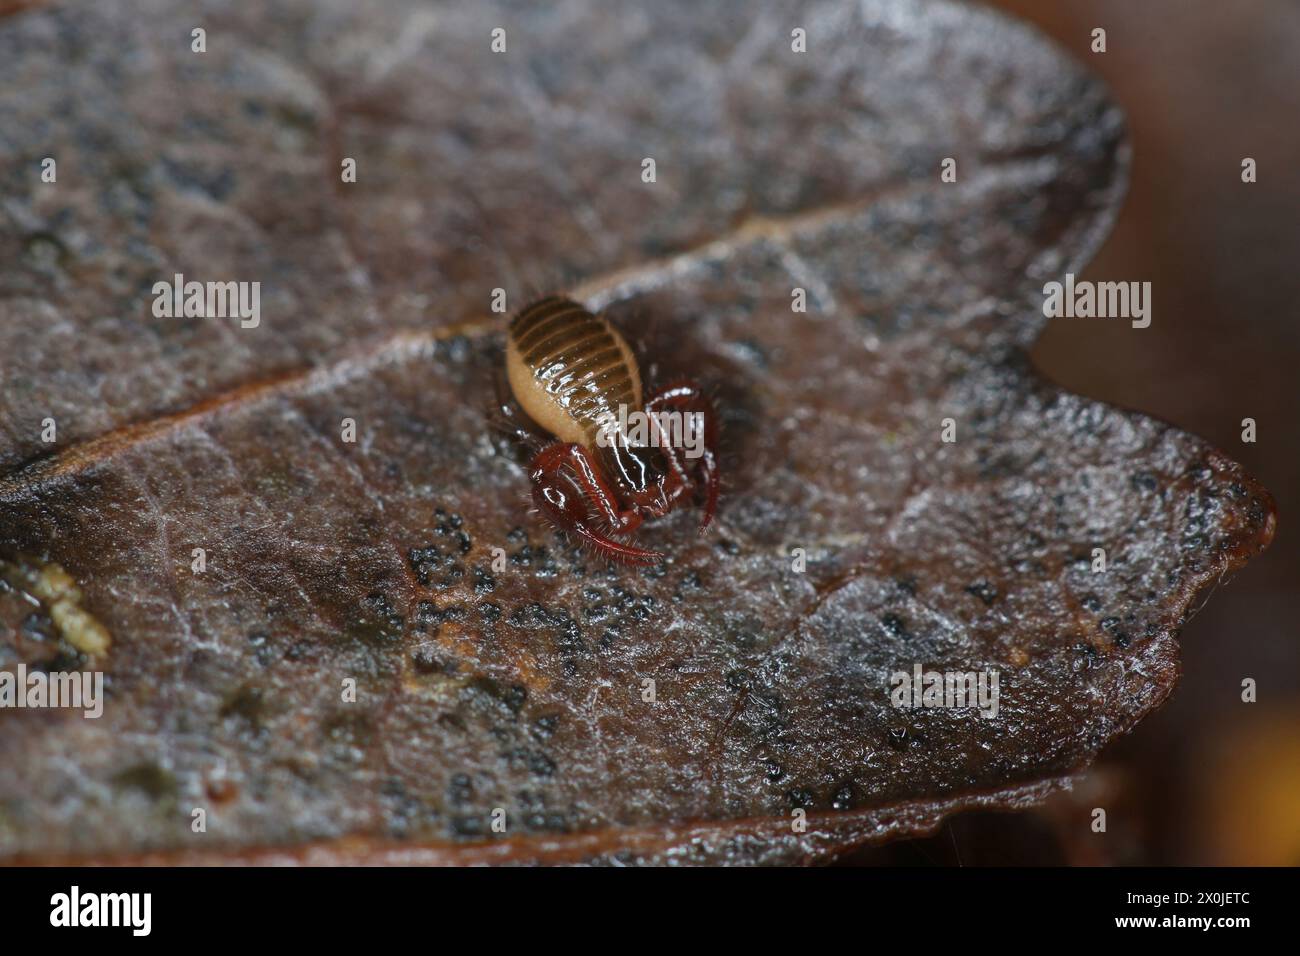 Moss scorpion (Neobisium carcinoides), pseudoscorpion, in winter in the leaf litter in the forest Stock Photo